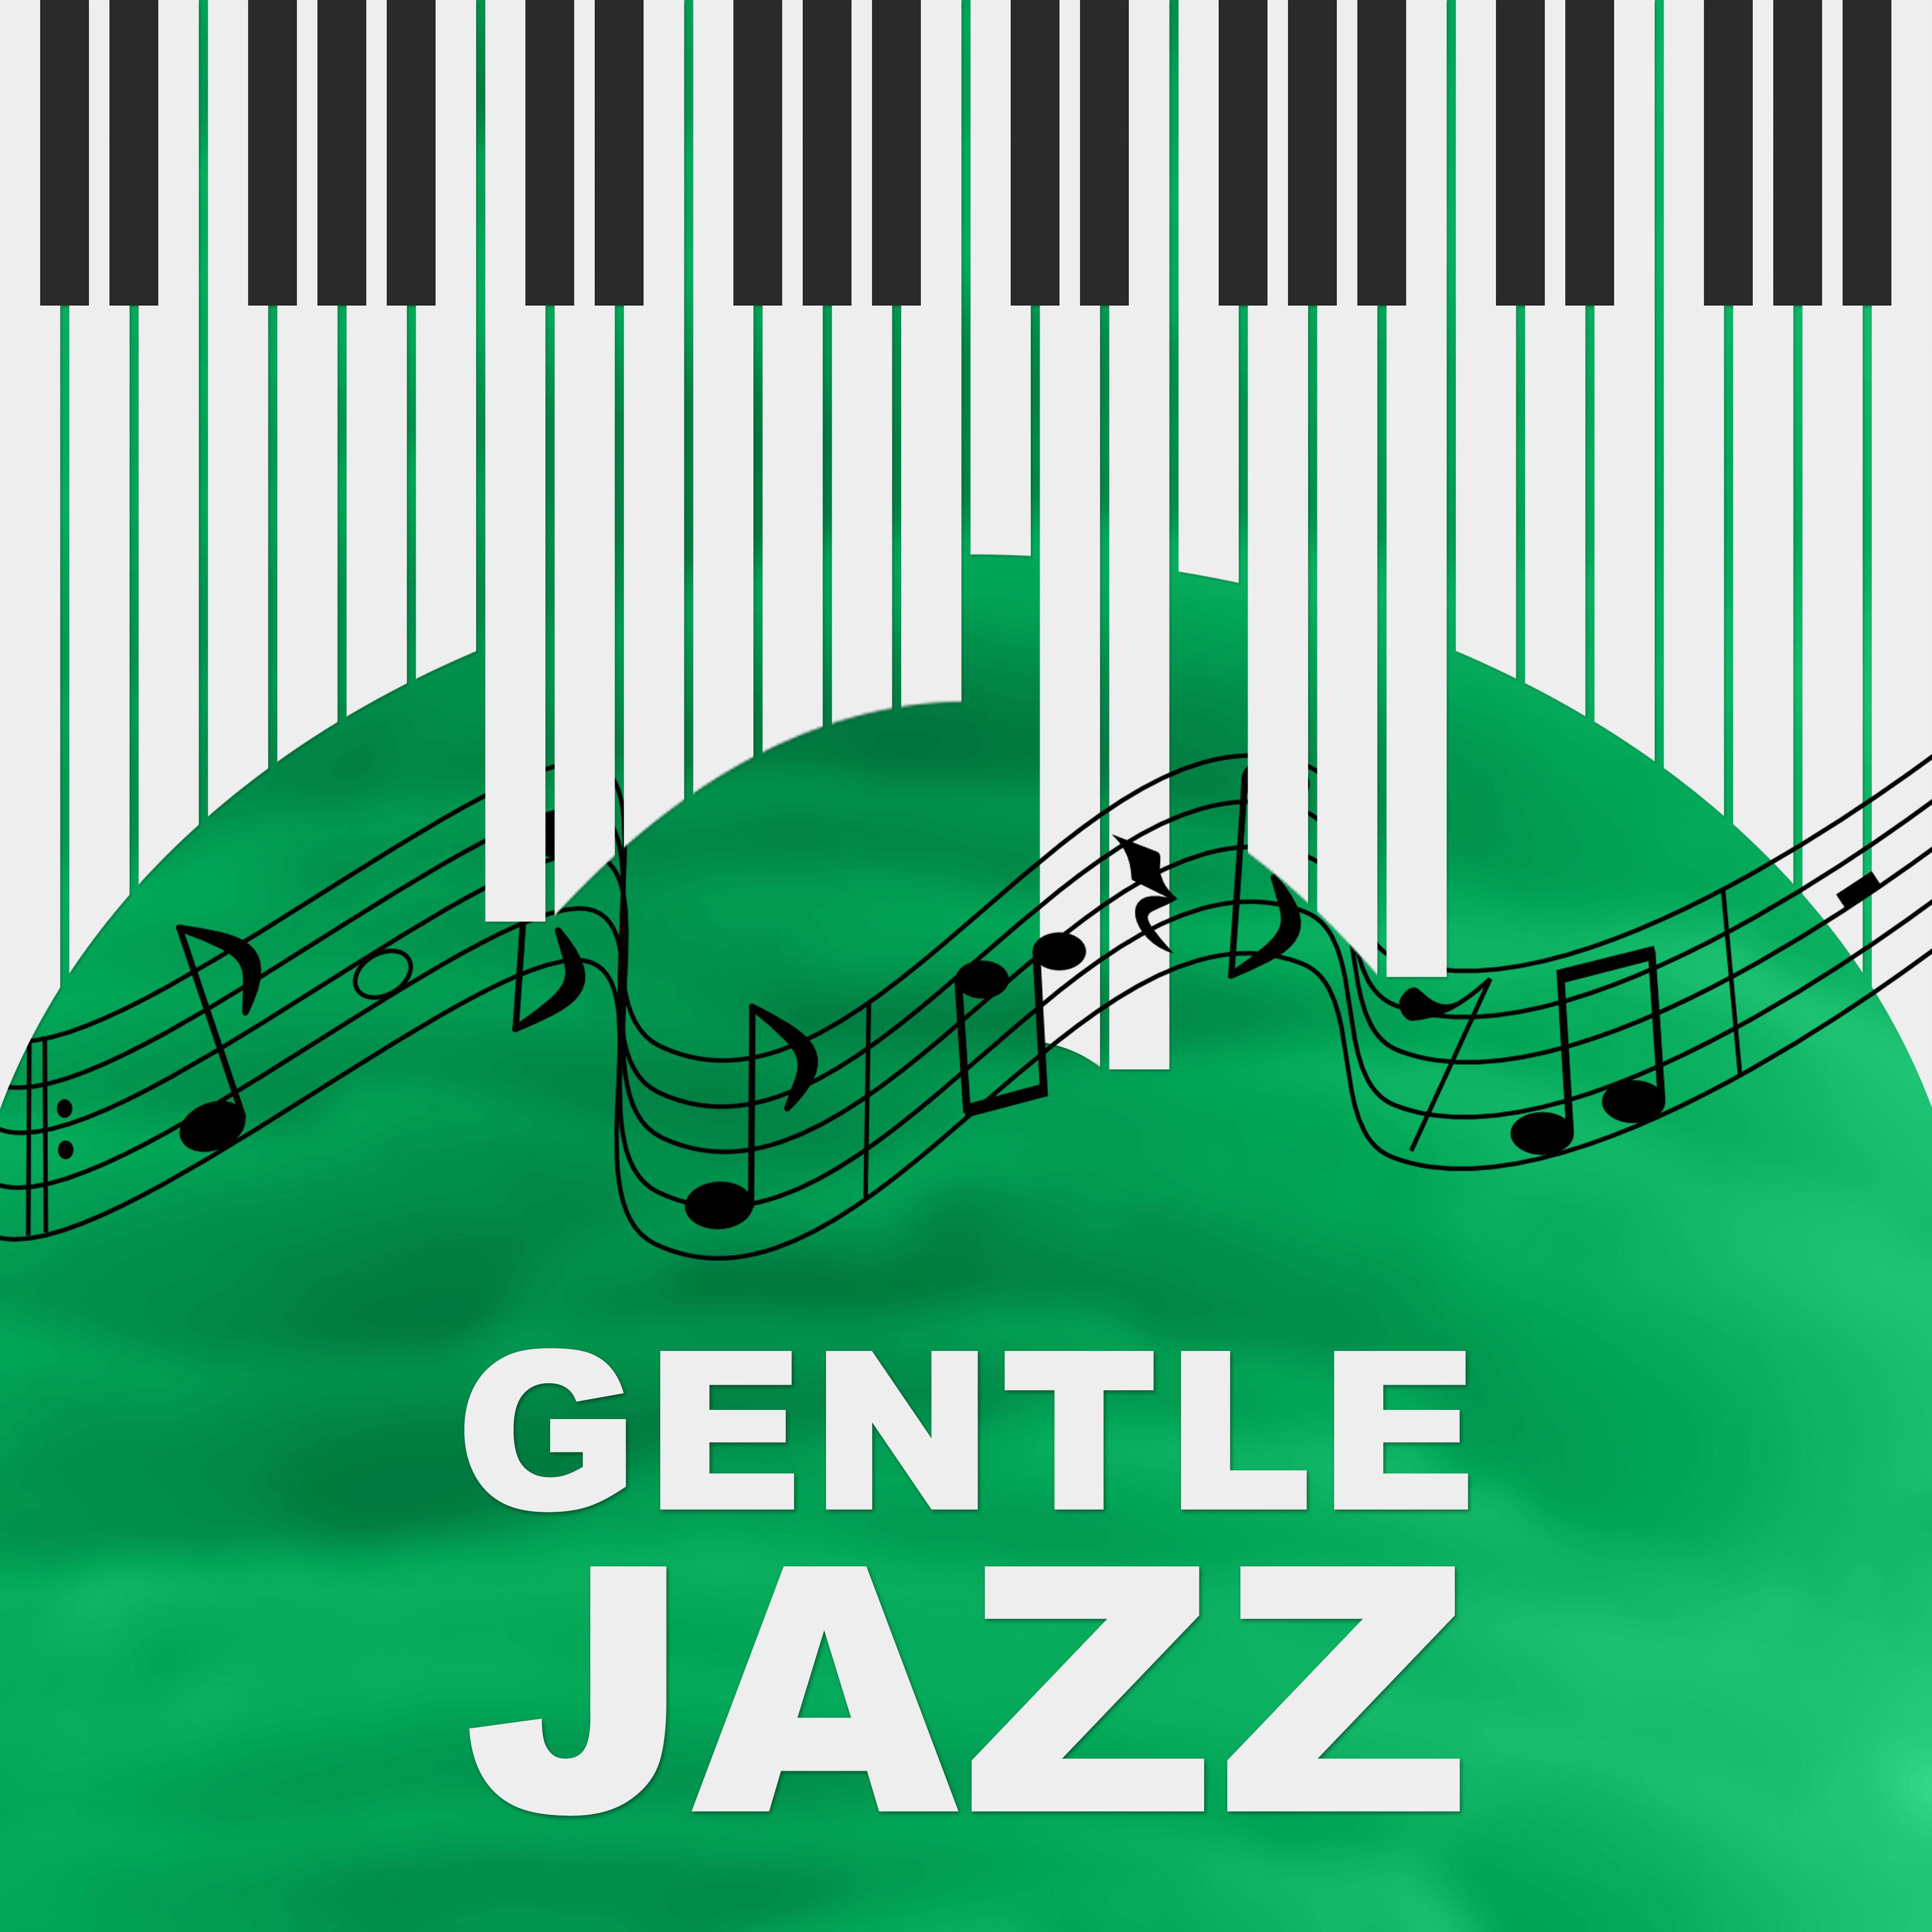 Gentle Jazz - Best Background Music, Piano Sounds to Relax, Soft Jazz for Everyone, Relaxing Piano